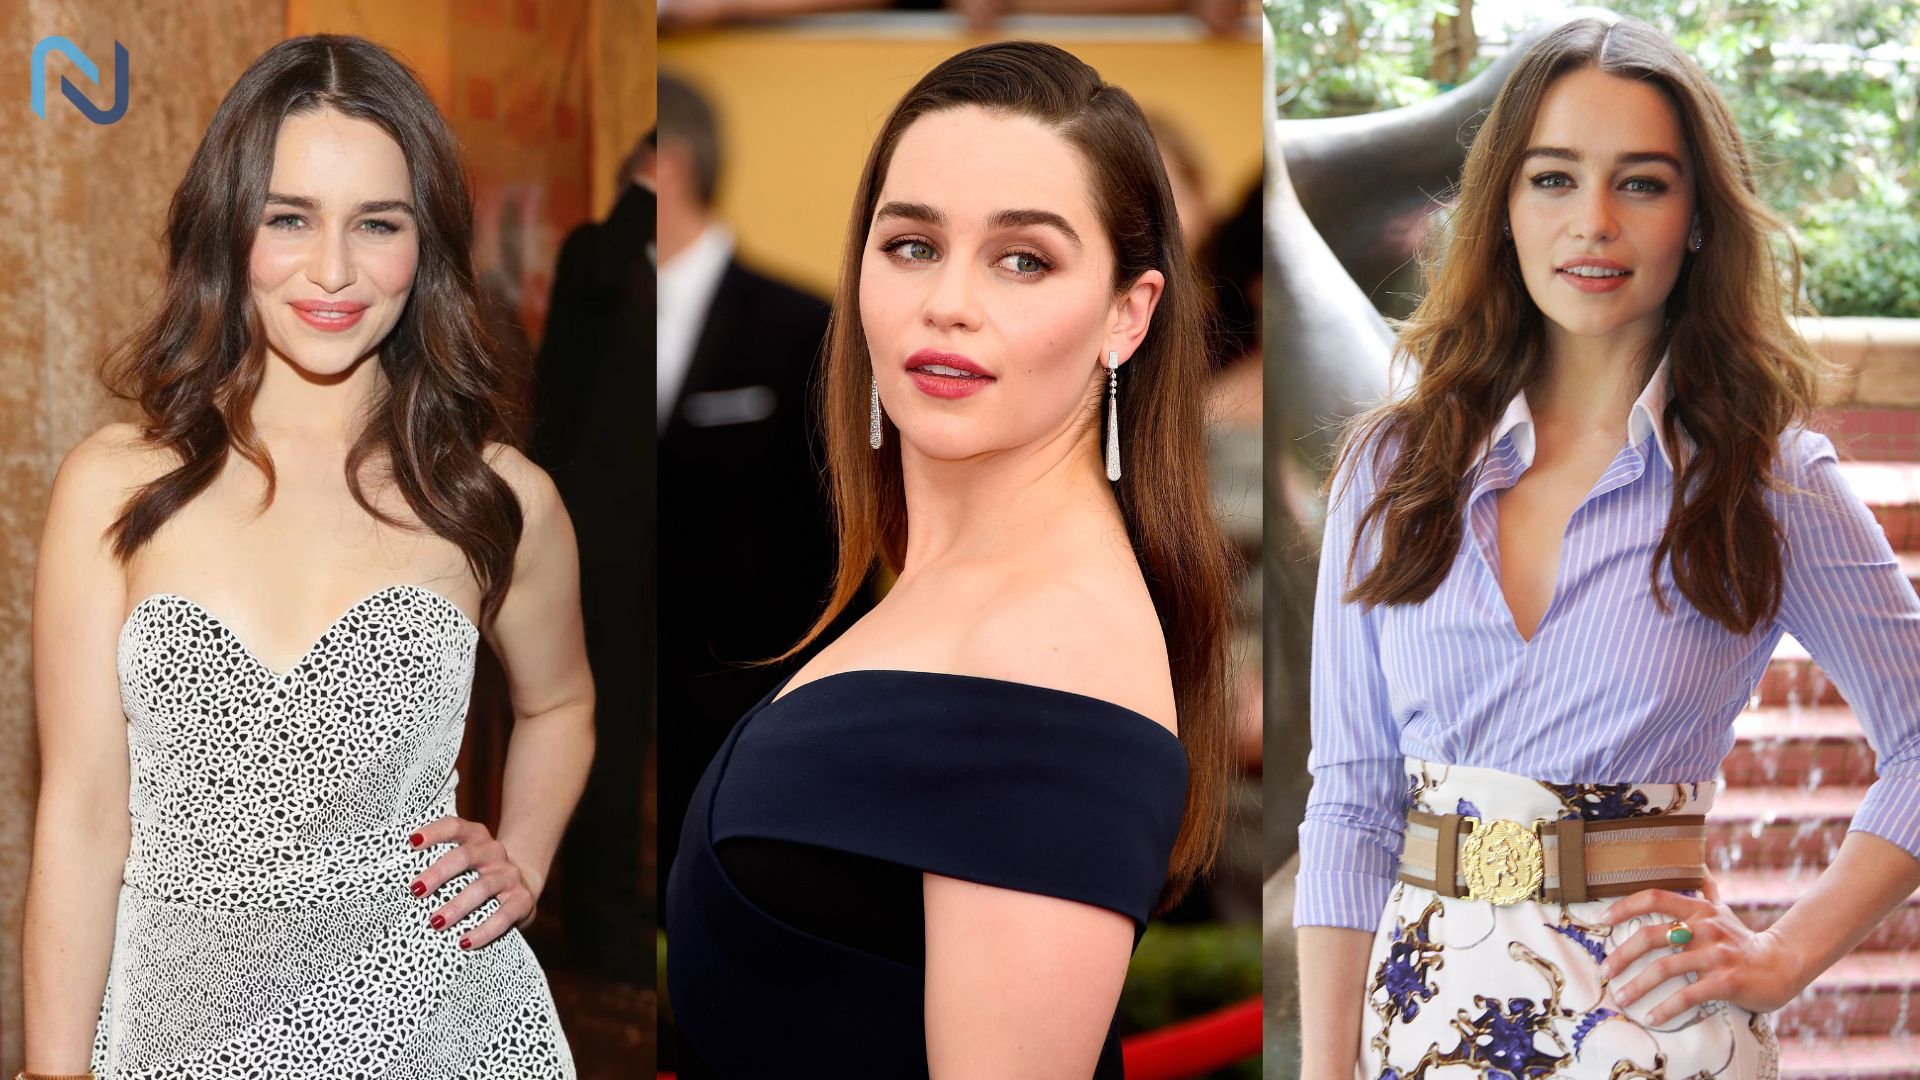 Emilia Clarke Most Beautiful and Hottest Women from England